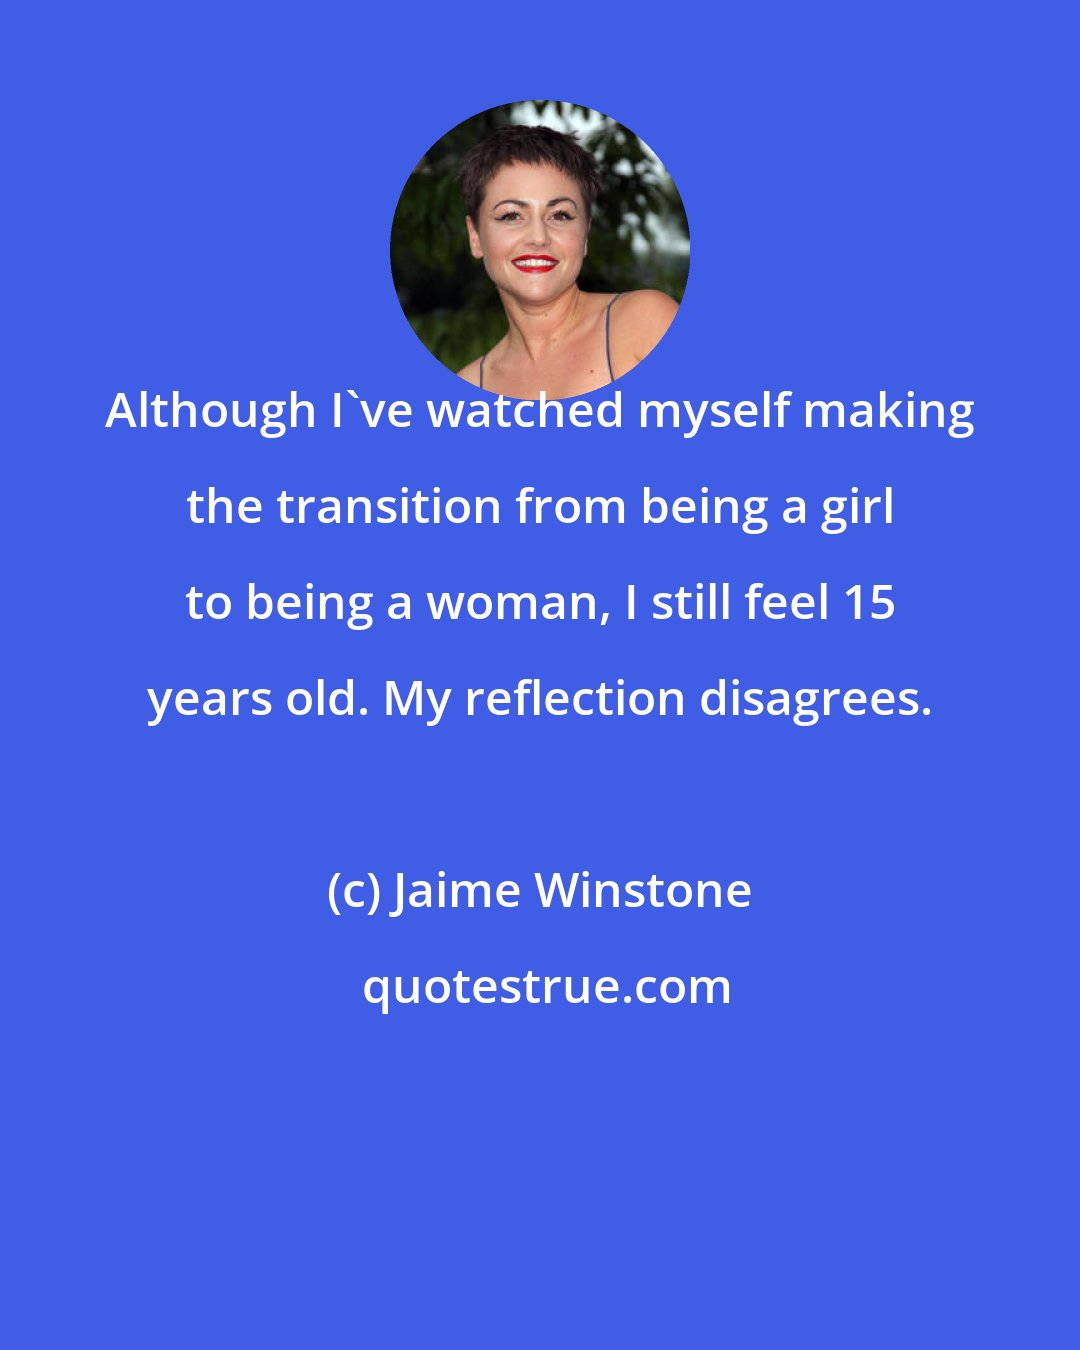 Jaime Winstone: Although I've watched myself making the transition from being a girl to being a woman, I still feel 15 years old. My reflection disagrees.